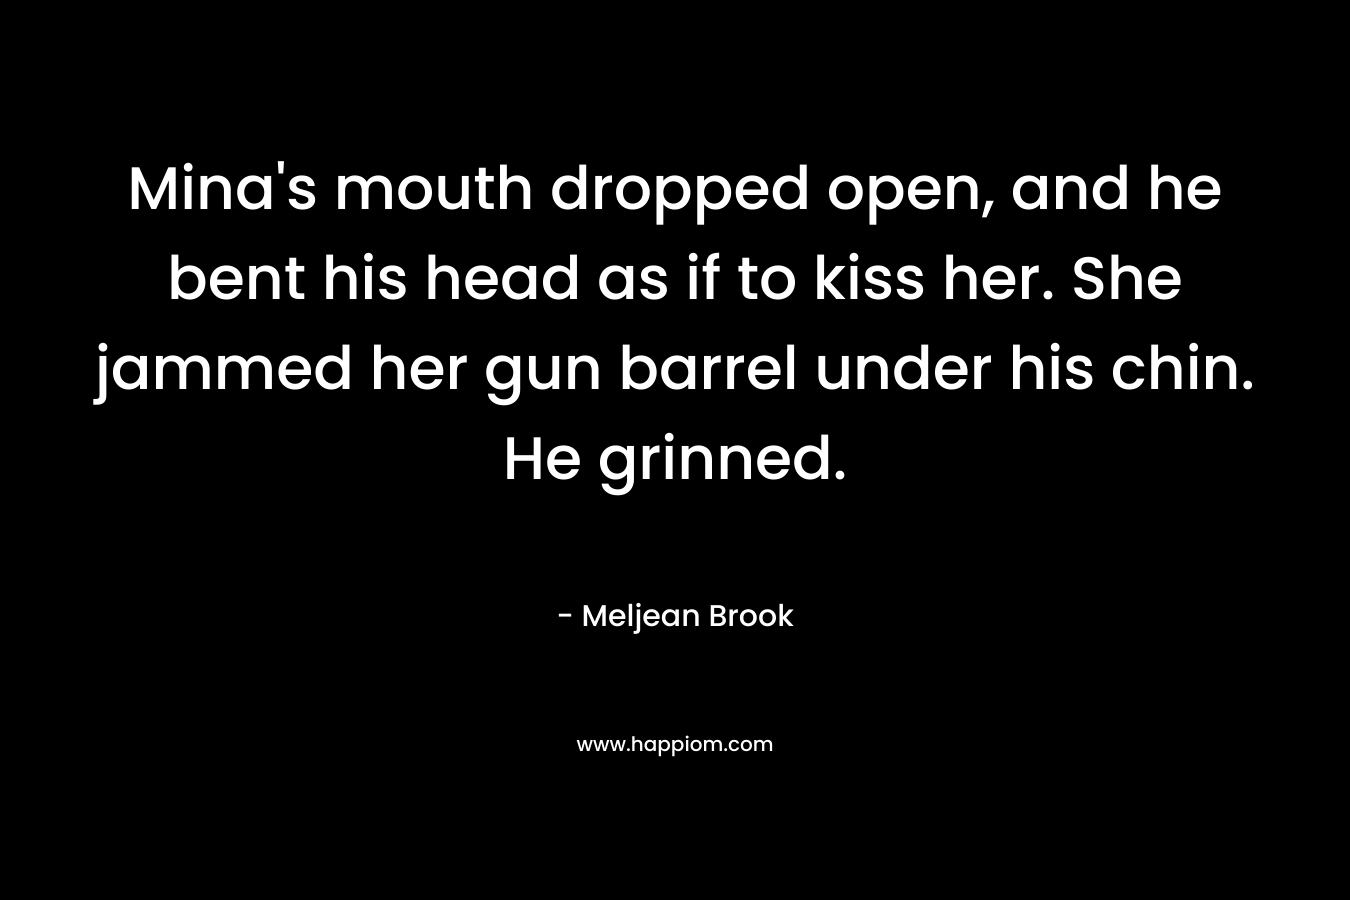 Mina's mouth dropped open, and he bent his head as if to kiss her. She jammed her gun barrel under his chin. He grinned.